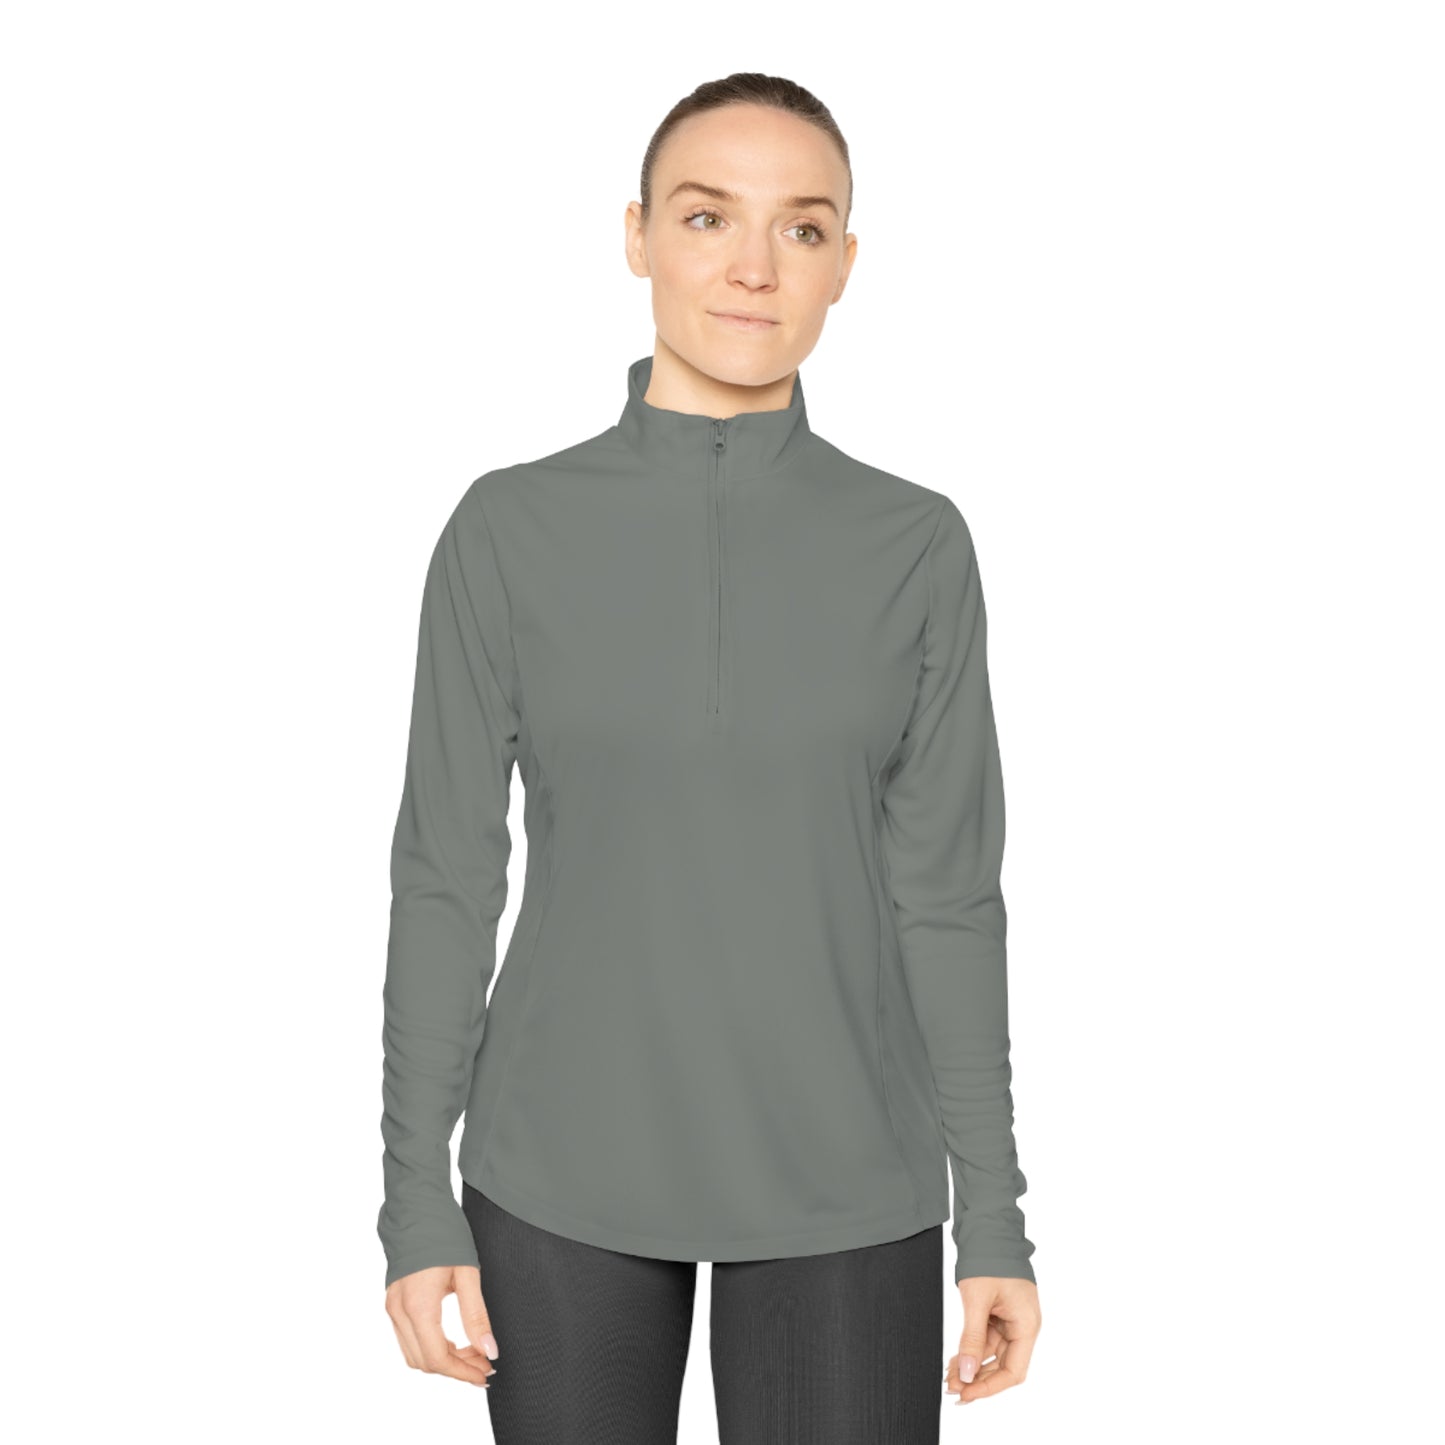 Happiness is a Dogo Ladies Quarter-Zip Pullover